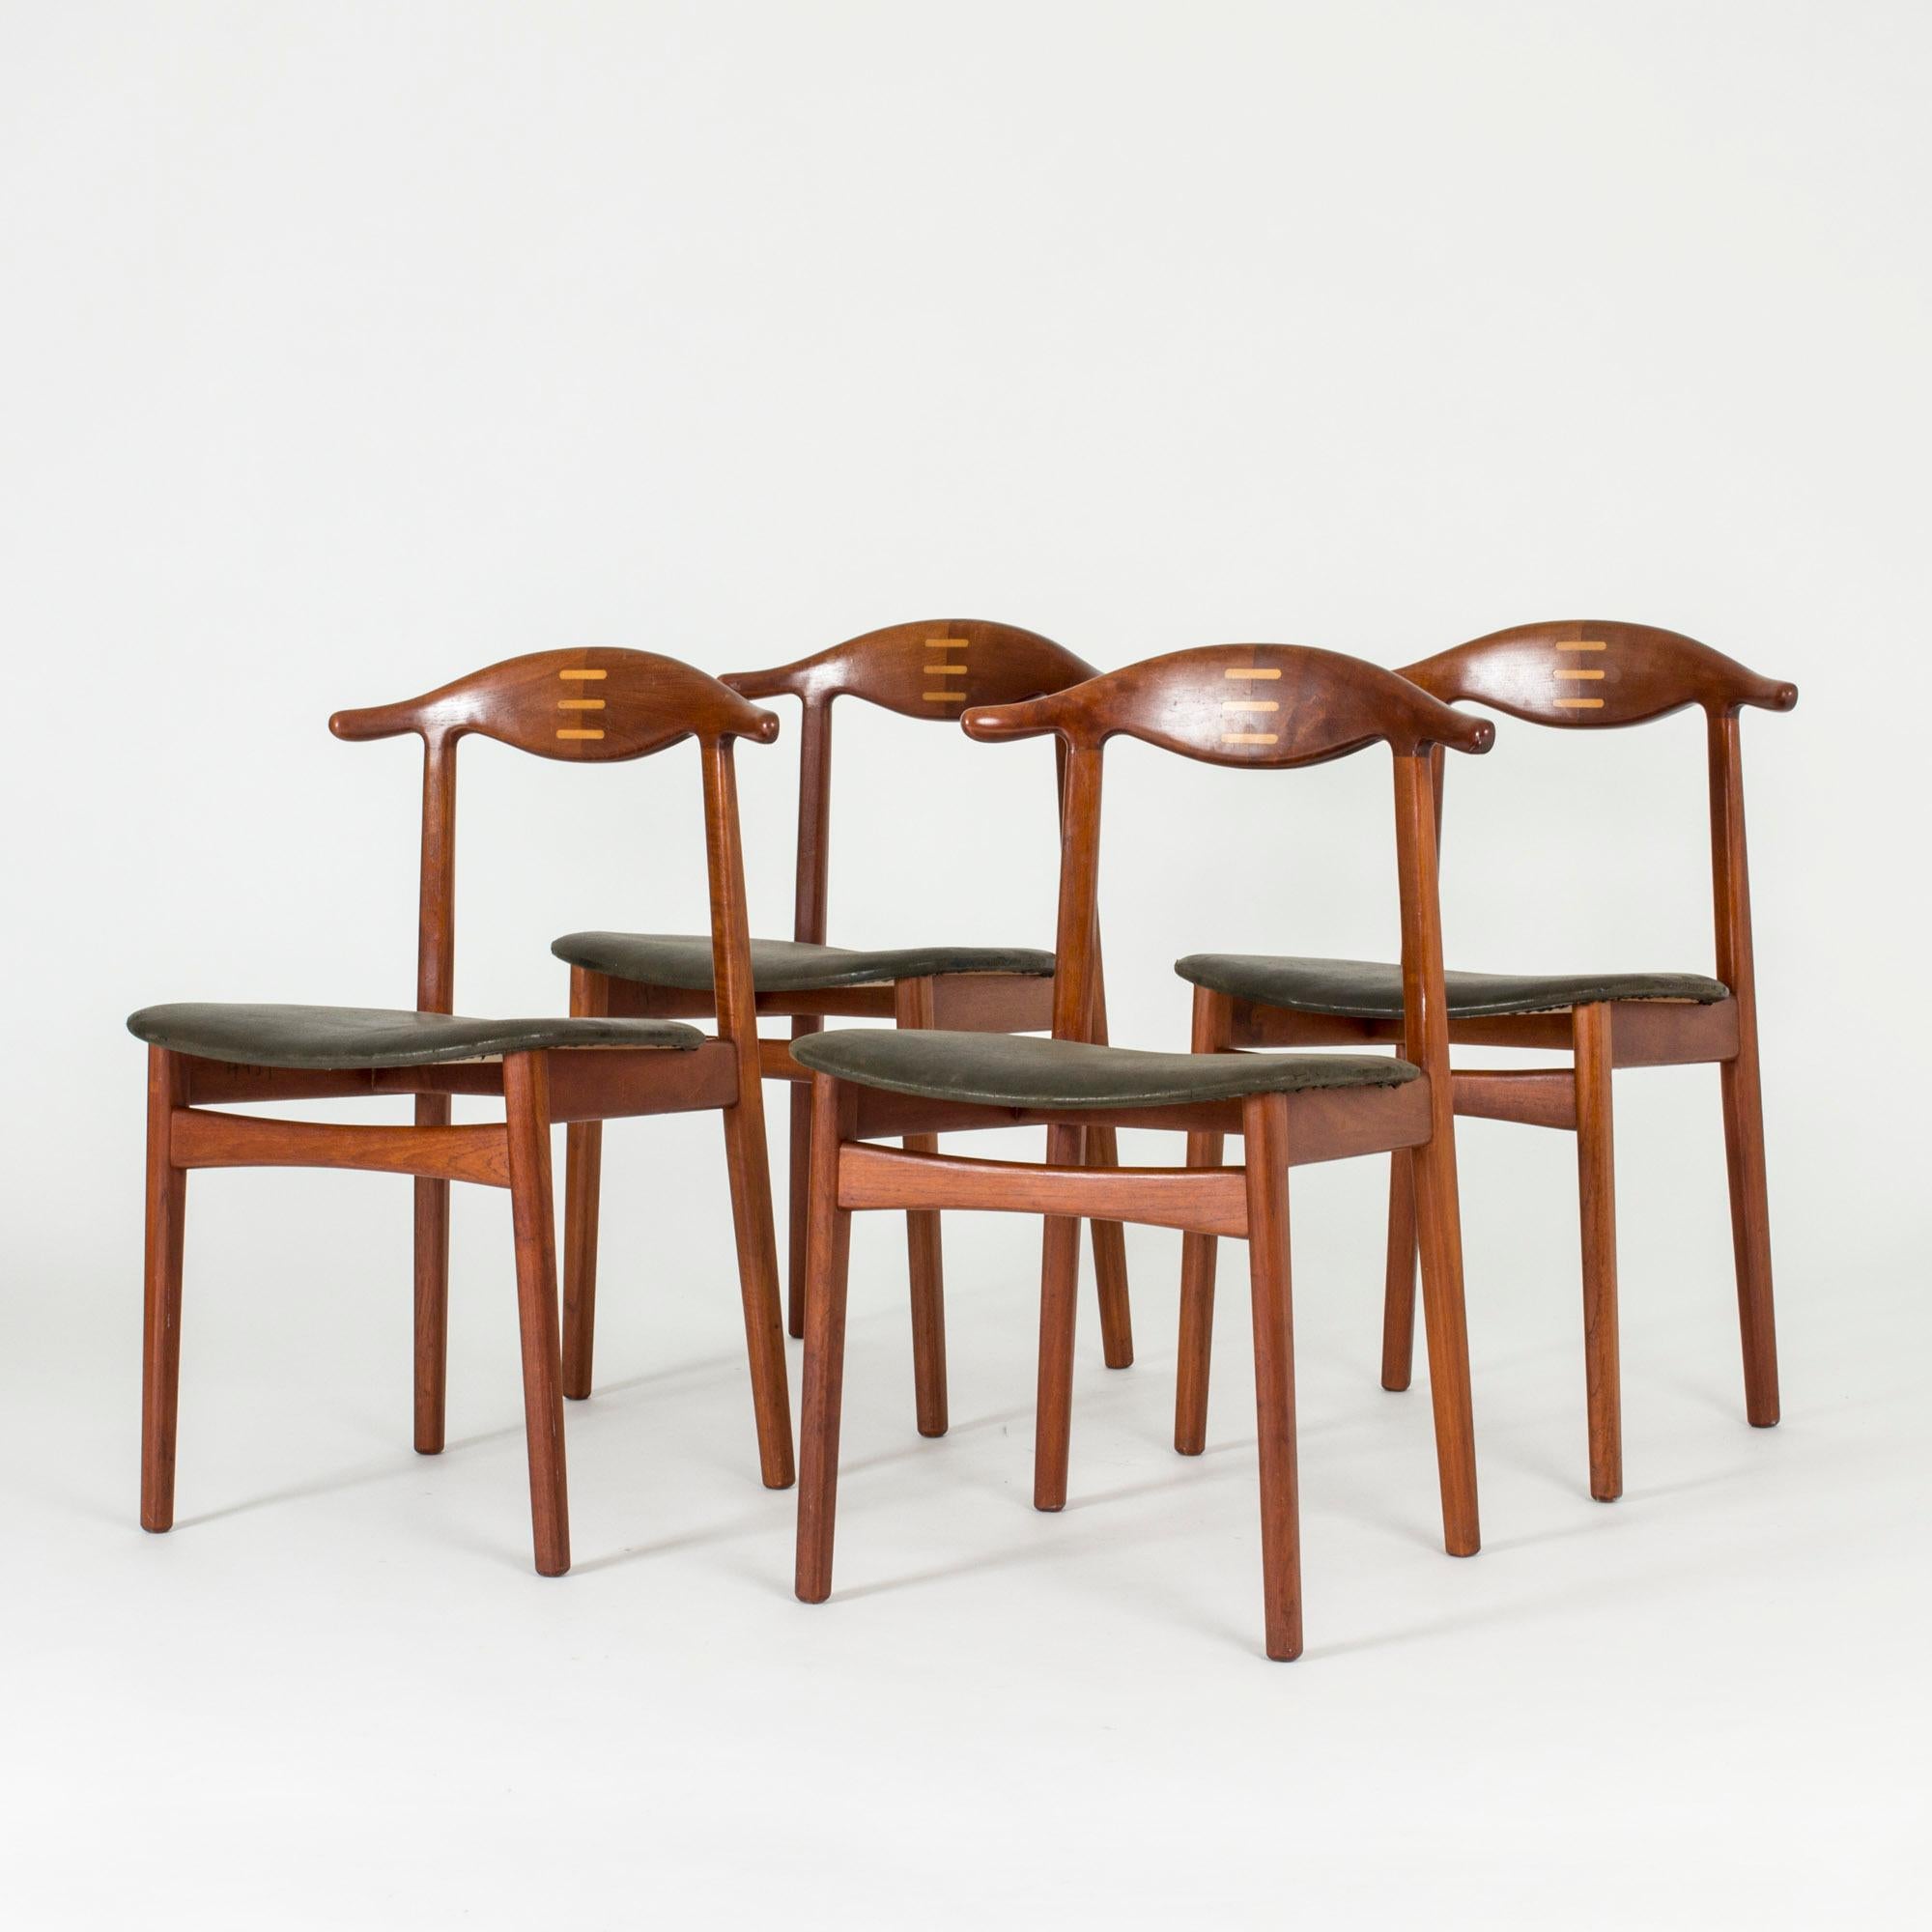 Set of four dining chairs by Knud Færch, made in rosewood with a pattern of stripes in a lighter wood on the backrests. Beautifully sculpted backrests and black leather seats.